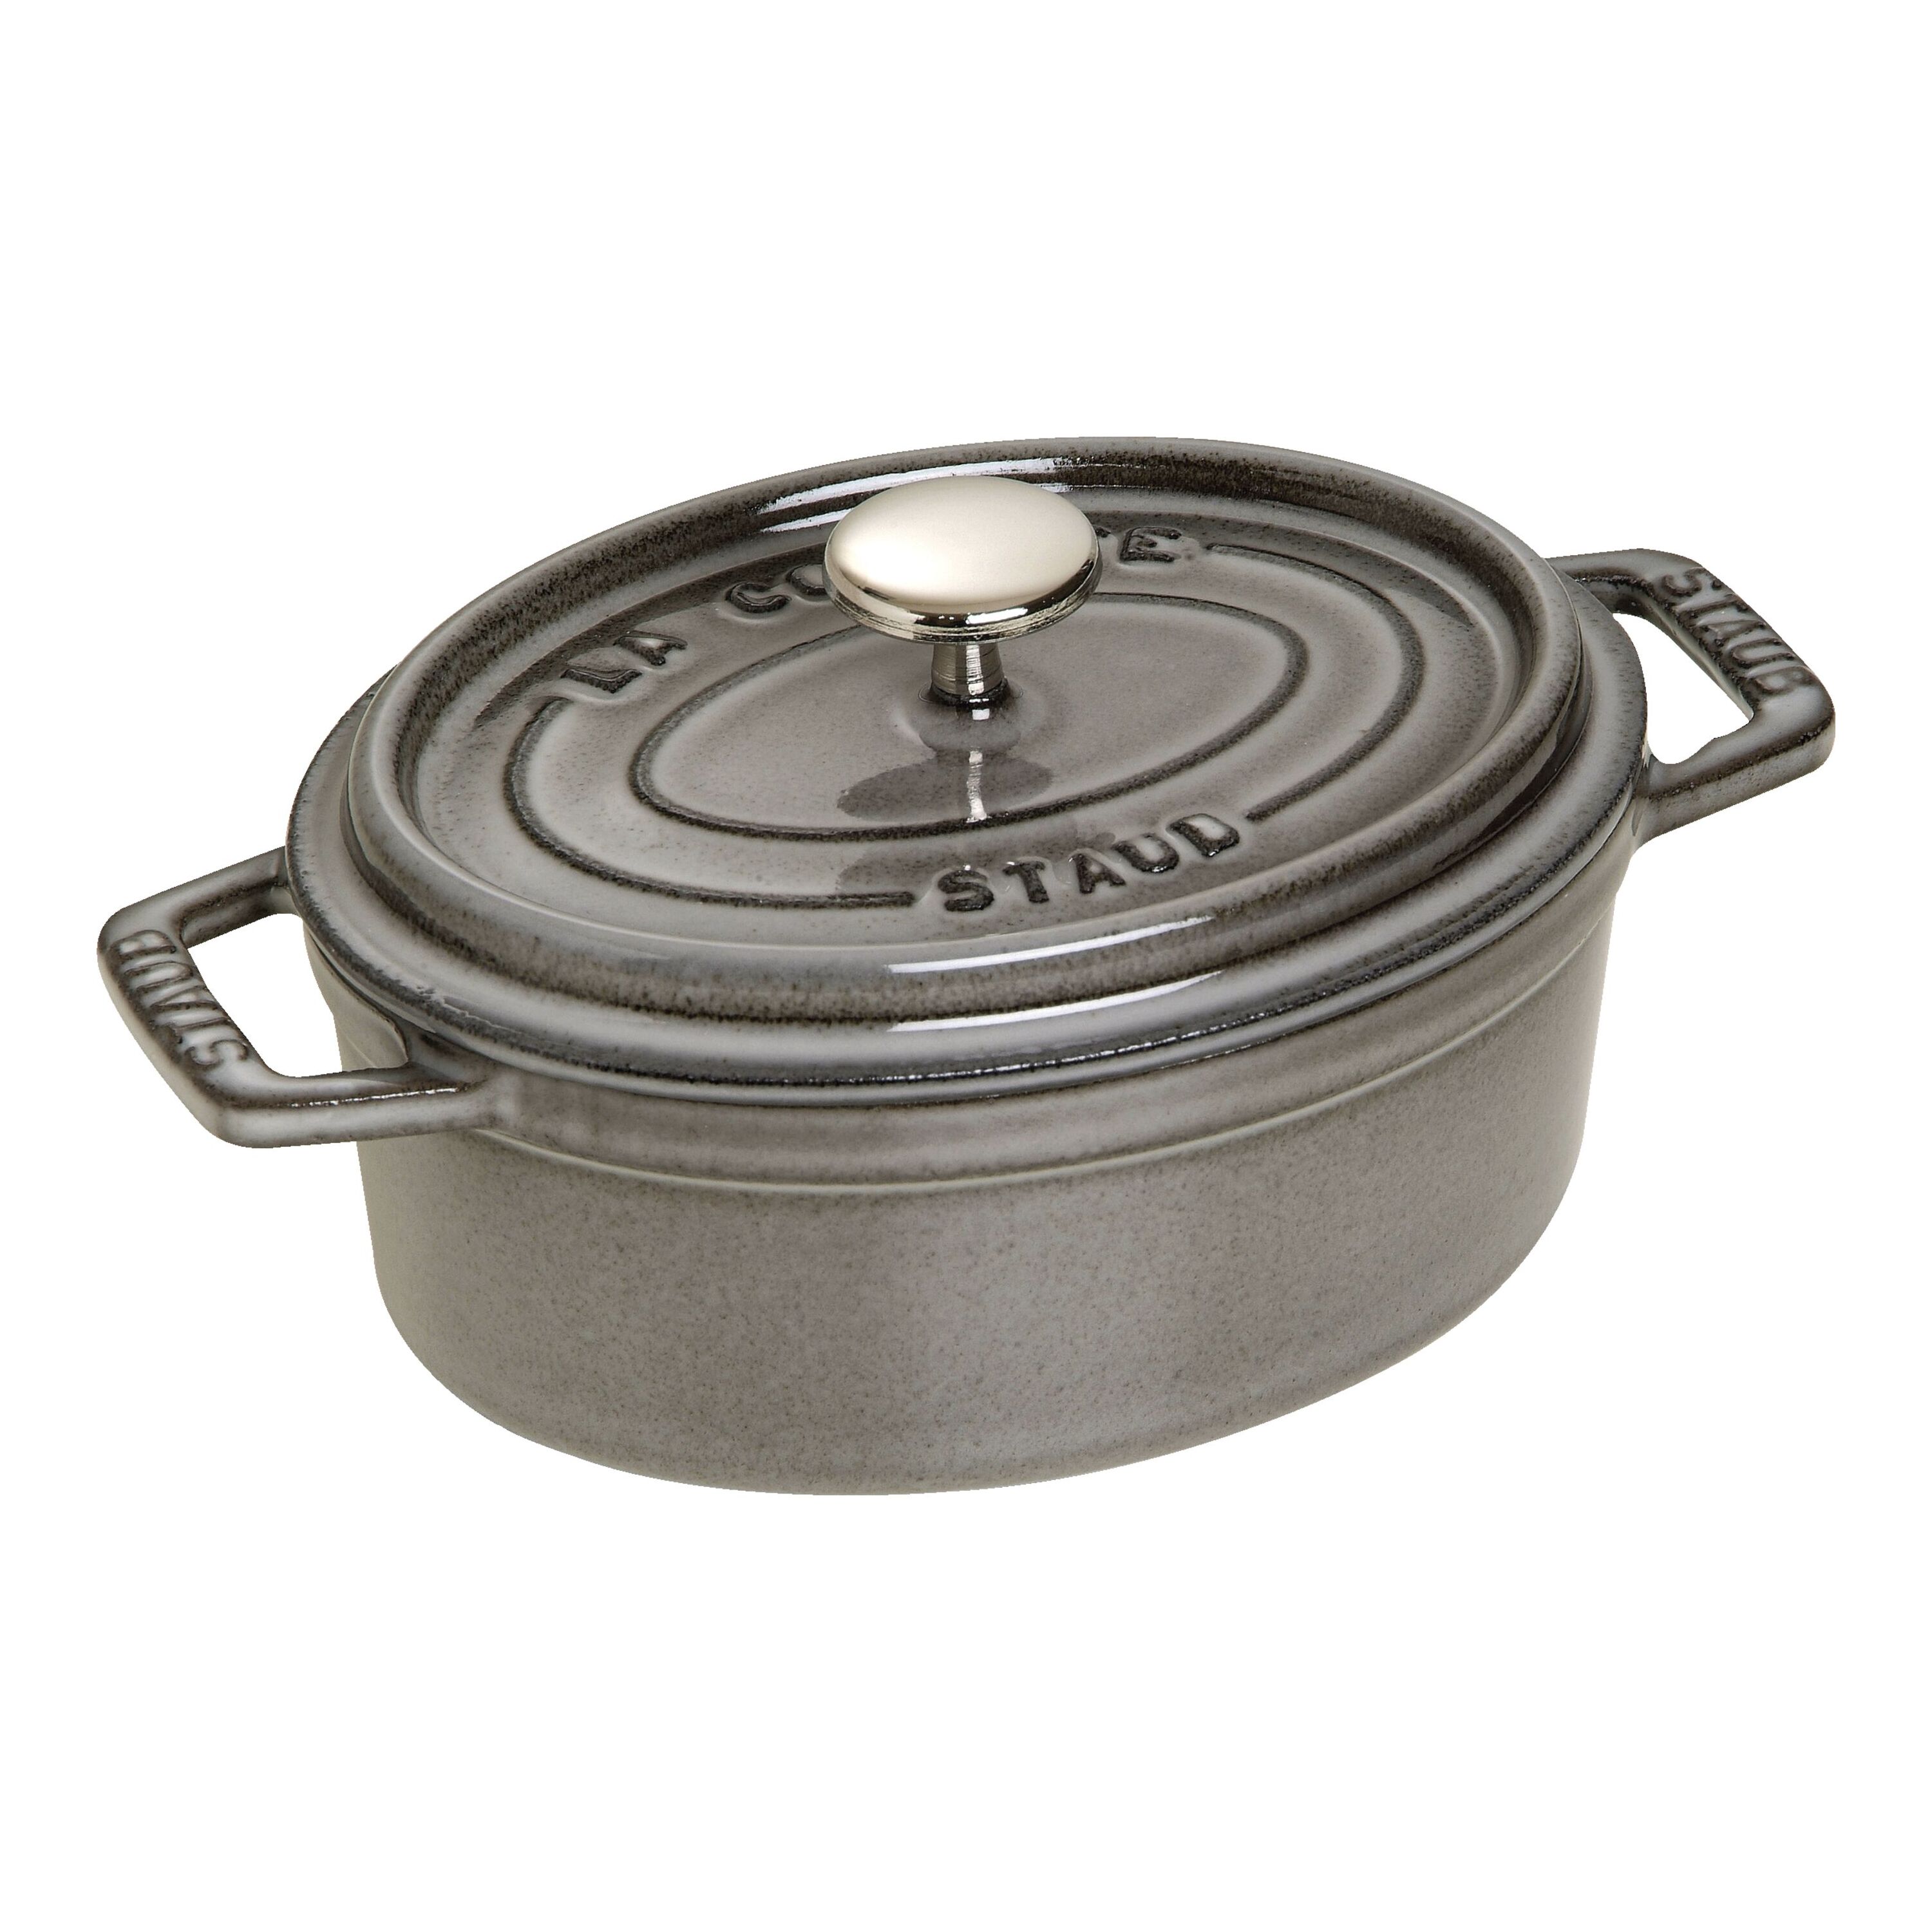 Buy Staub Cocottes Oval Iron Cocotte - Cast